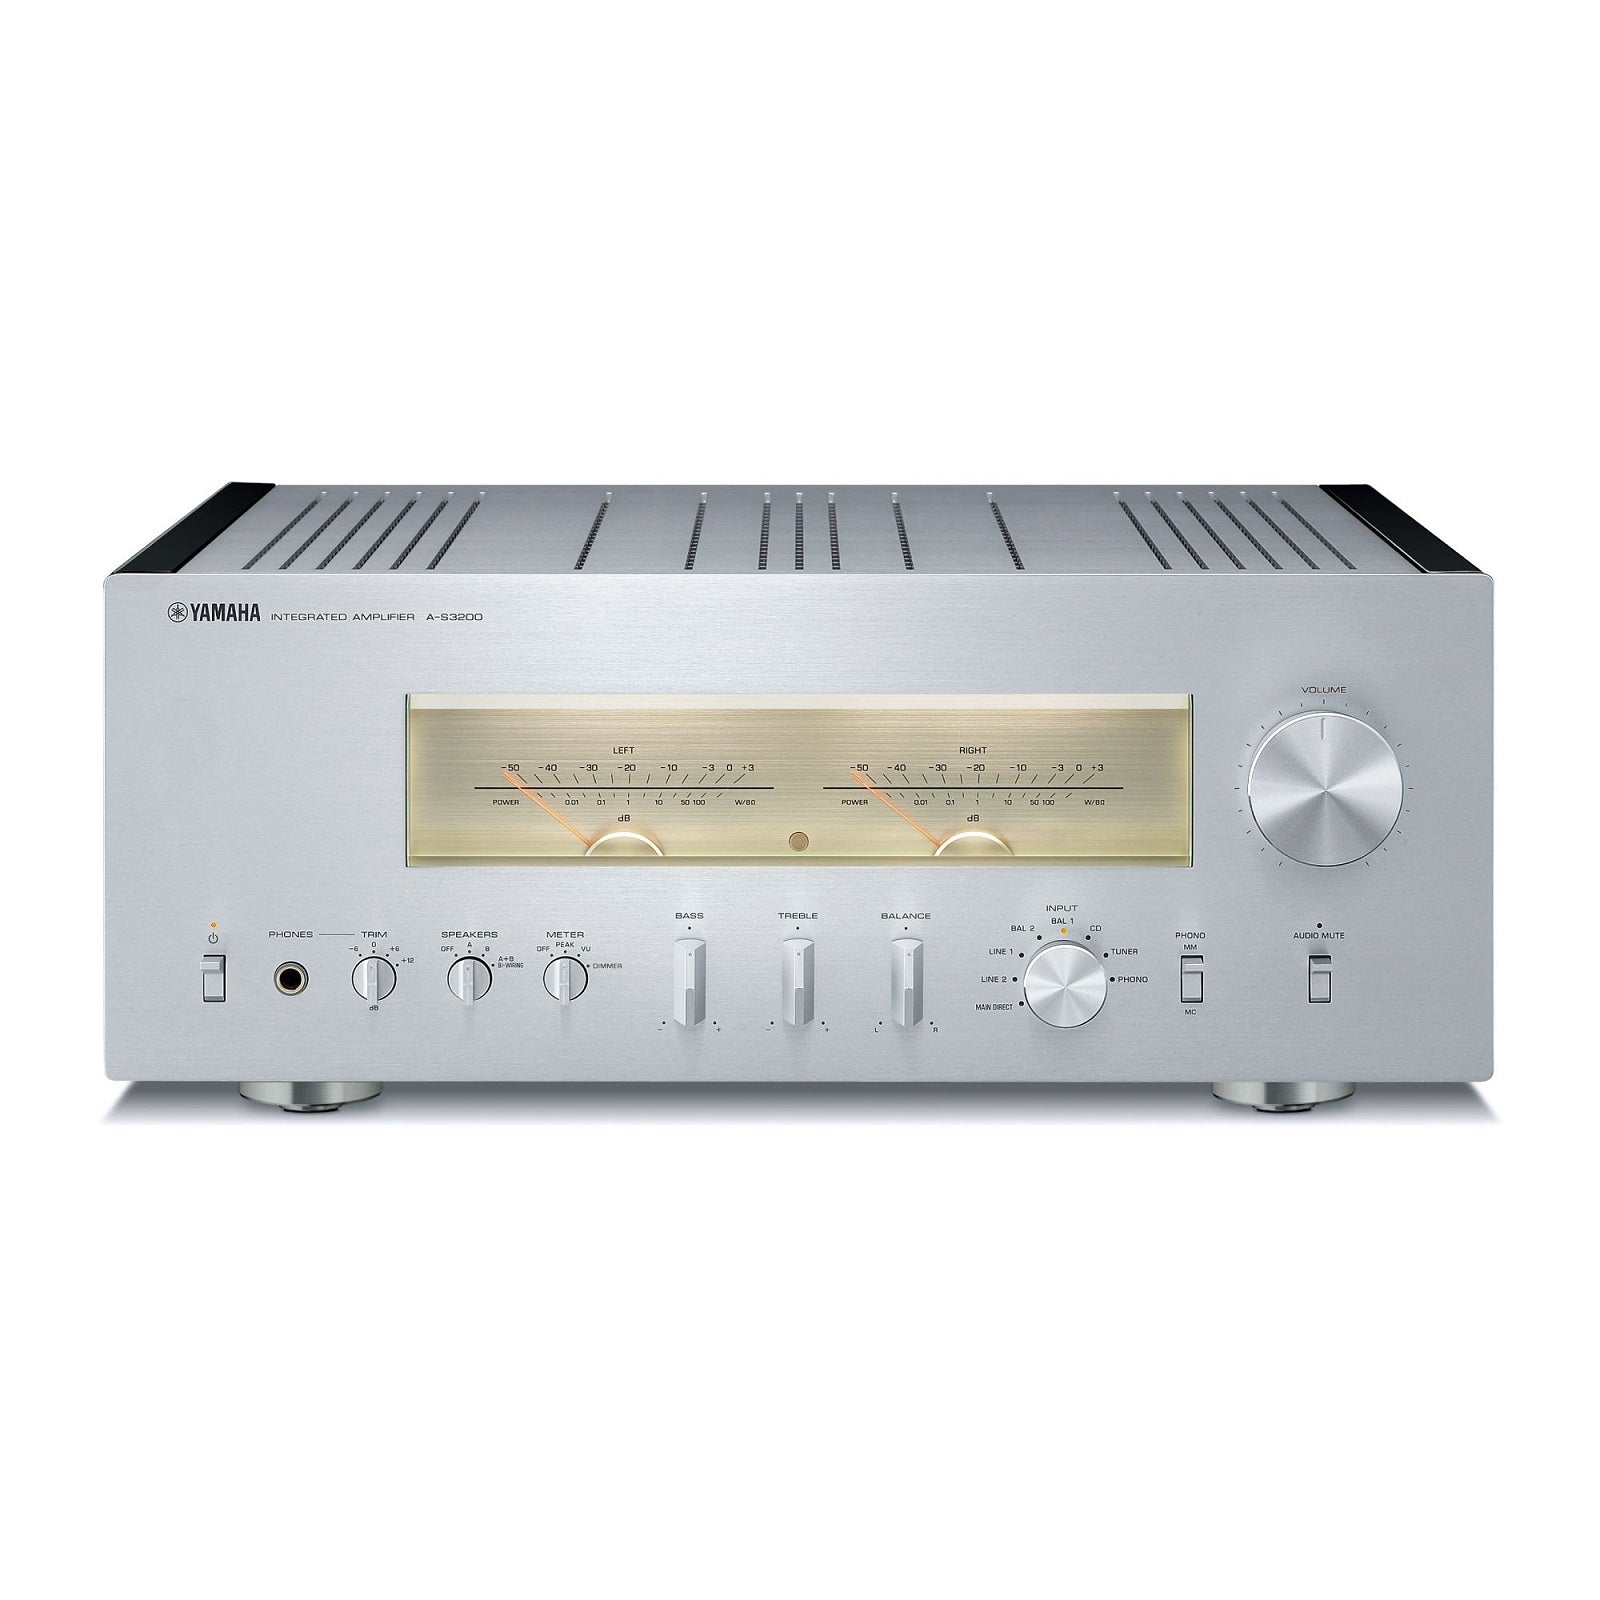 Yamaha A-S3200 Stereo 200W Integrated Amplifier